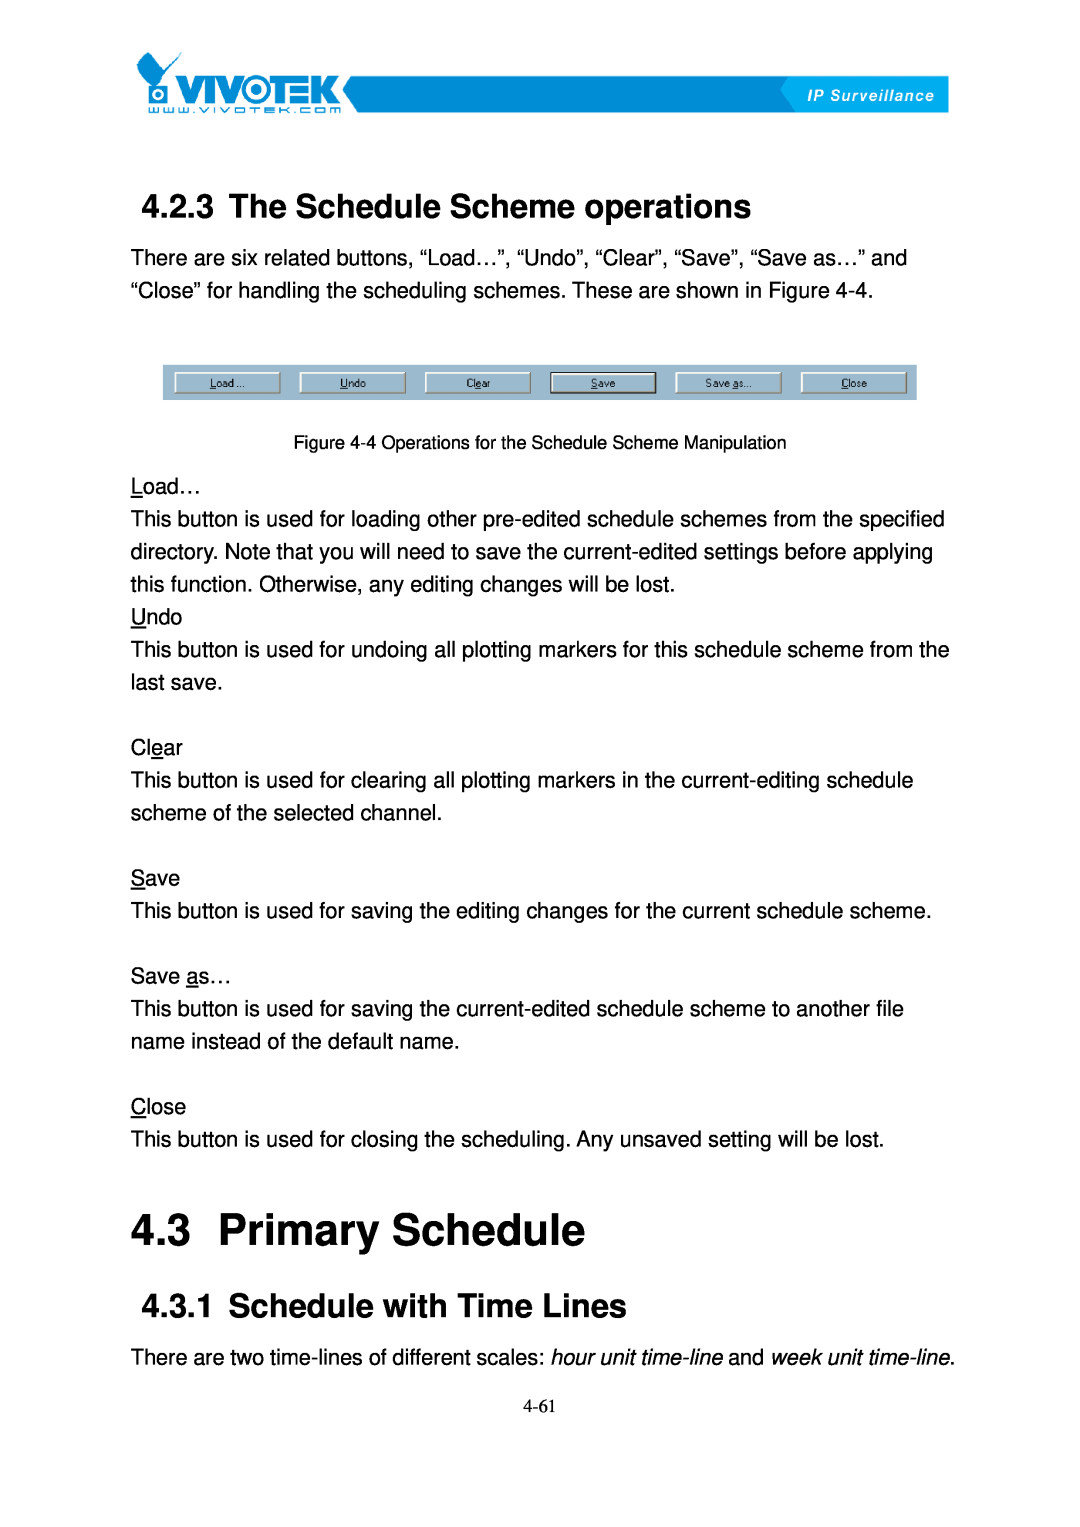 Vivotek ST3402 user manual Primary19BSchedule, 4.2.3 The49BSchedule Scheme operations, Schedule50Bwith Time Lines 